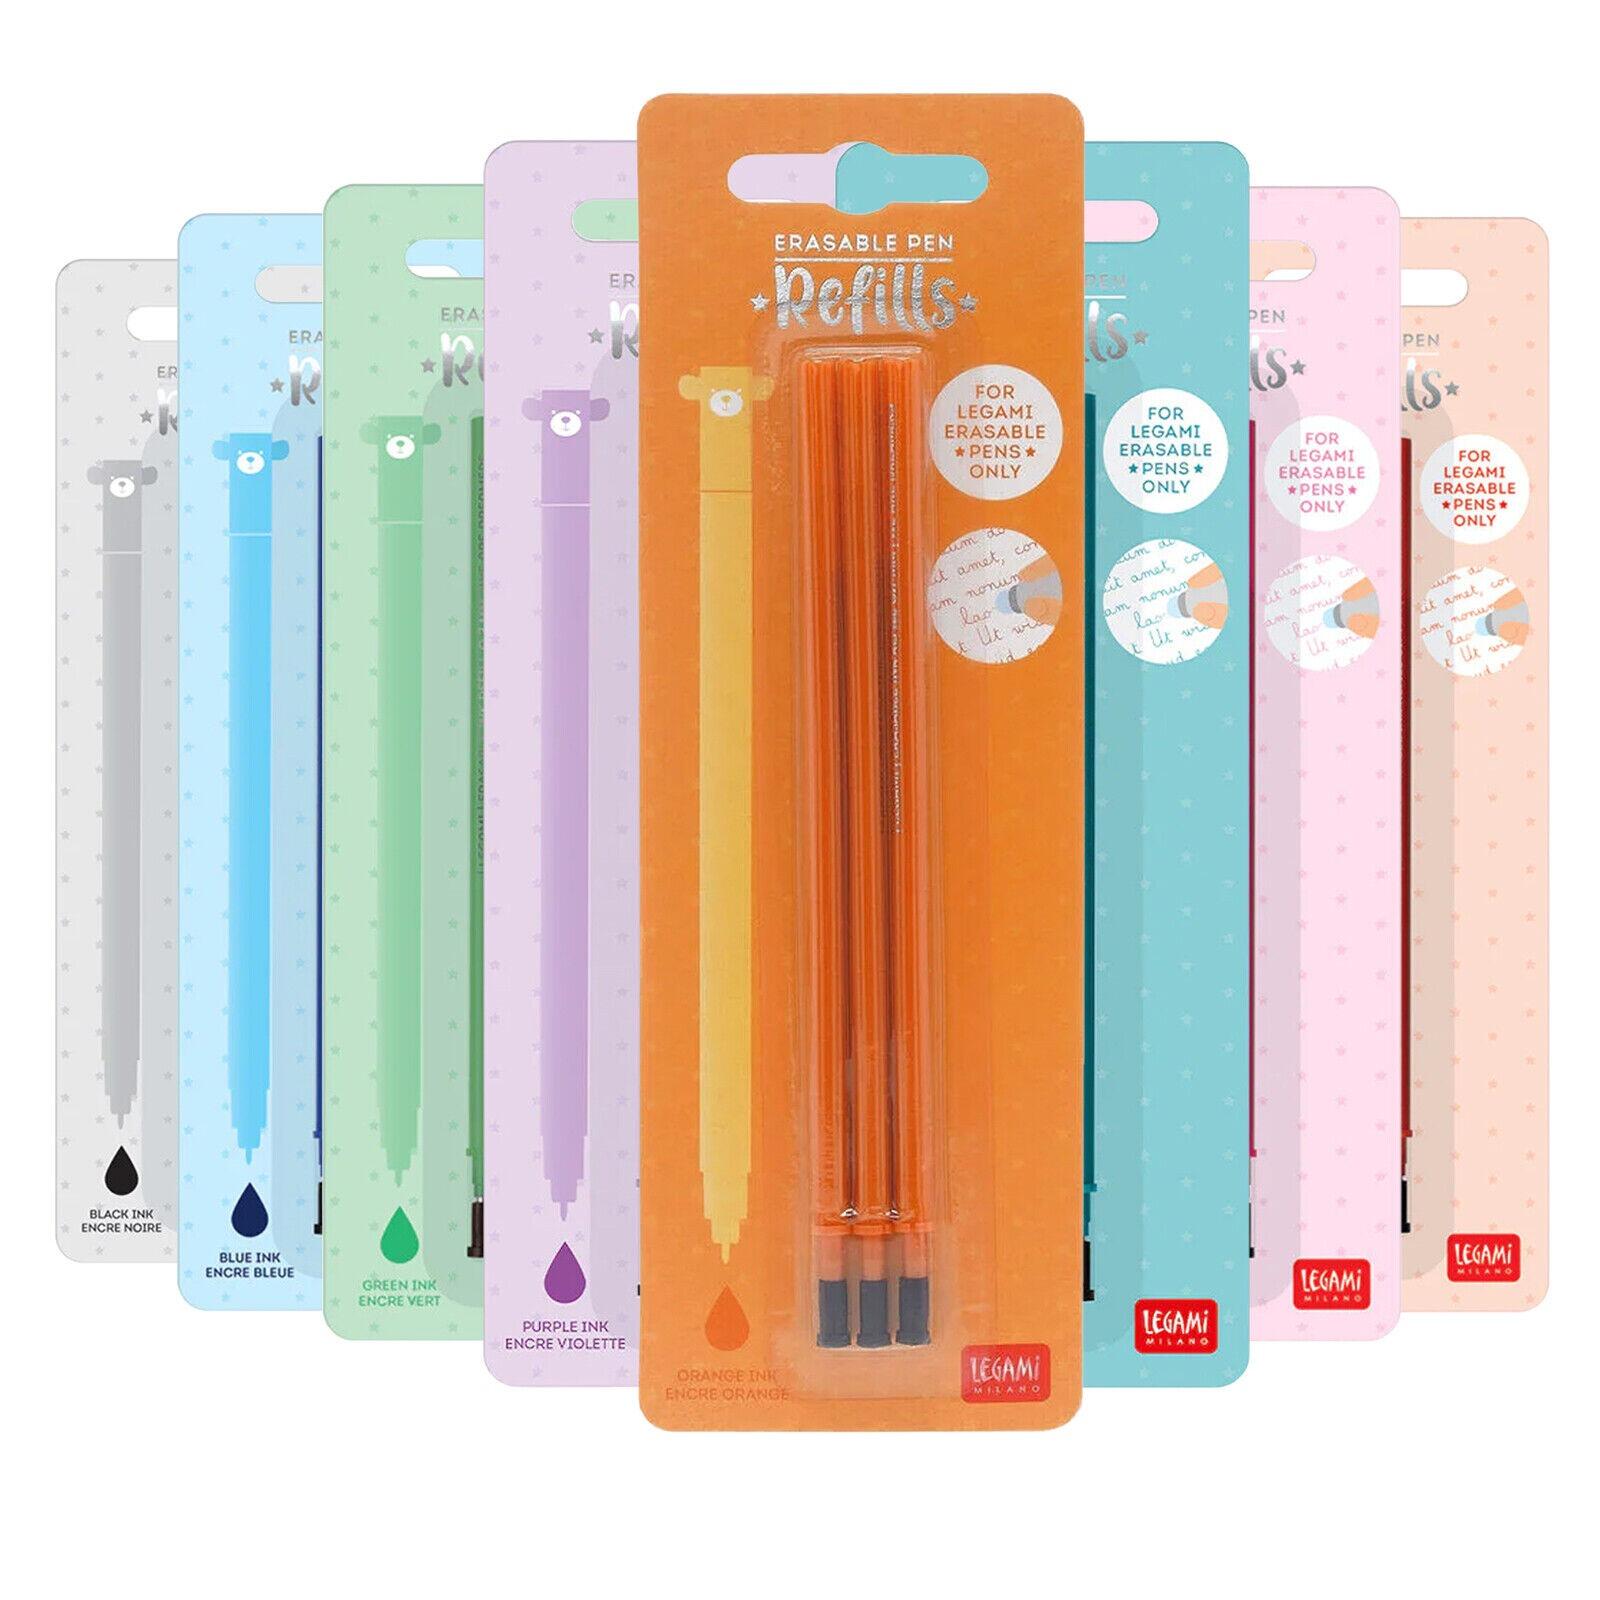 Legami Refills for Erasable Gel Pen - All Colours Available - Free